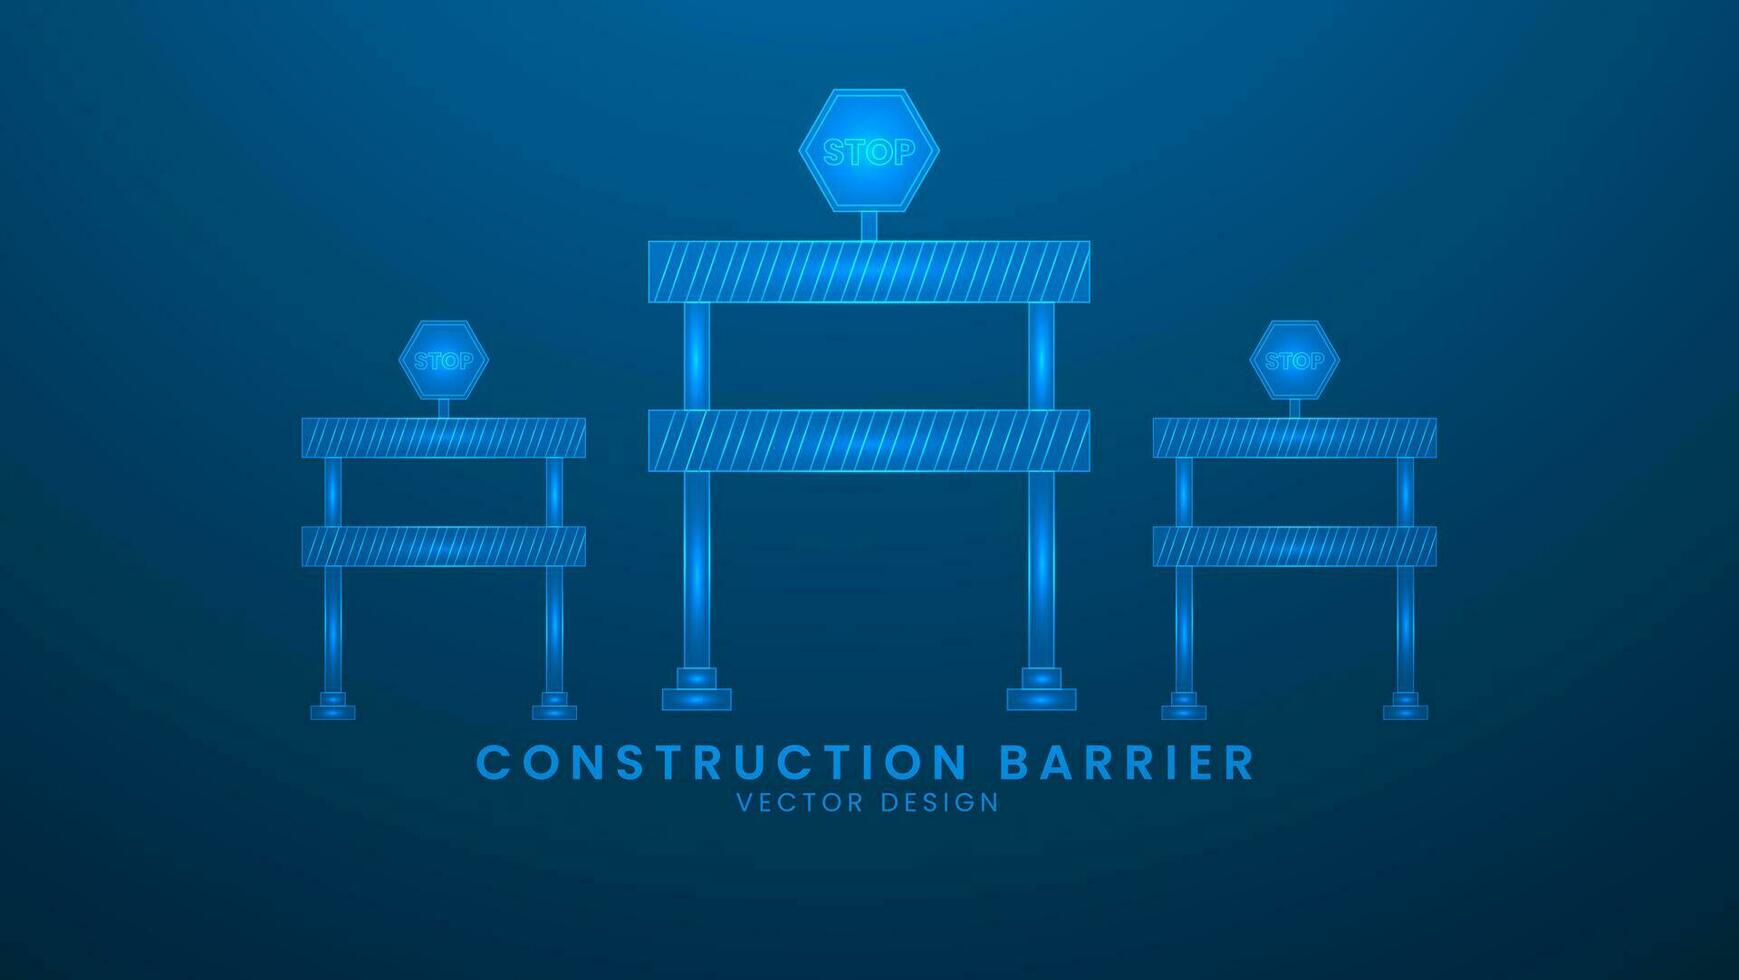 Construction barrier, warning barrier, under construction. Repair or building construction concept. Vector illustration with light effect and neon